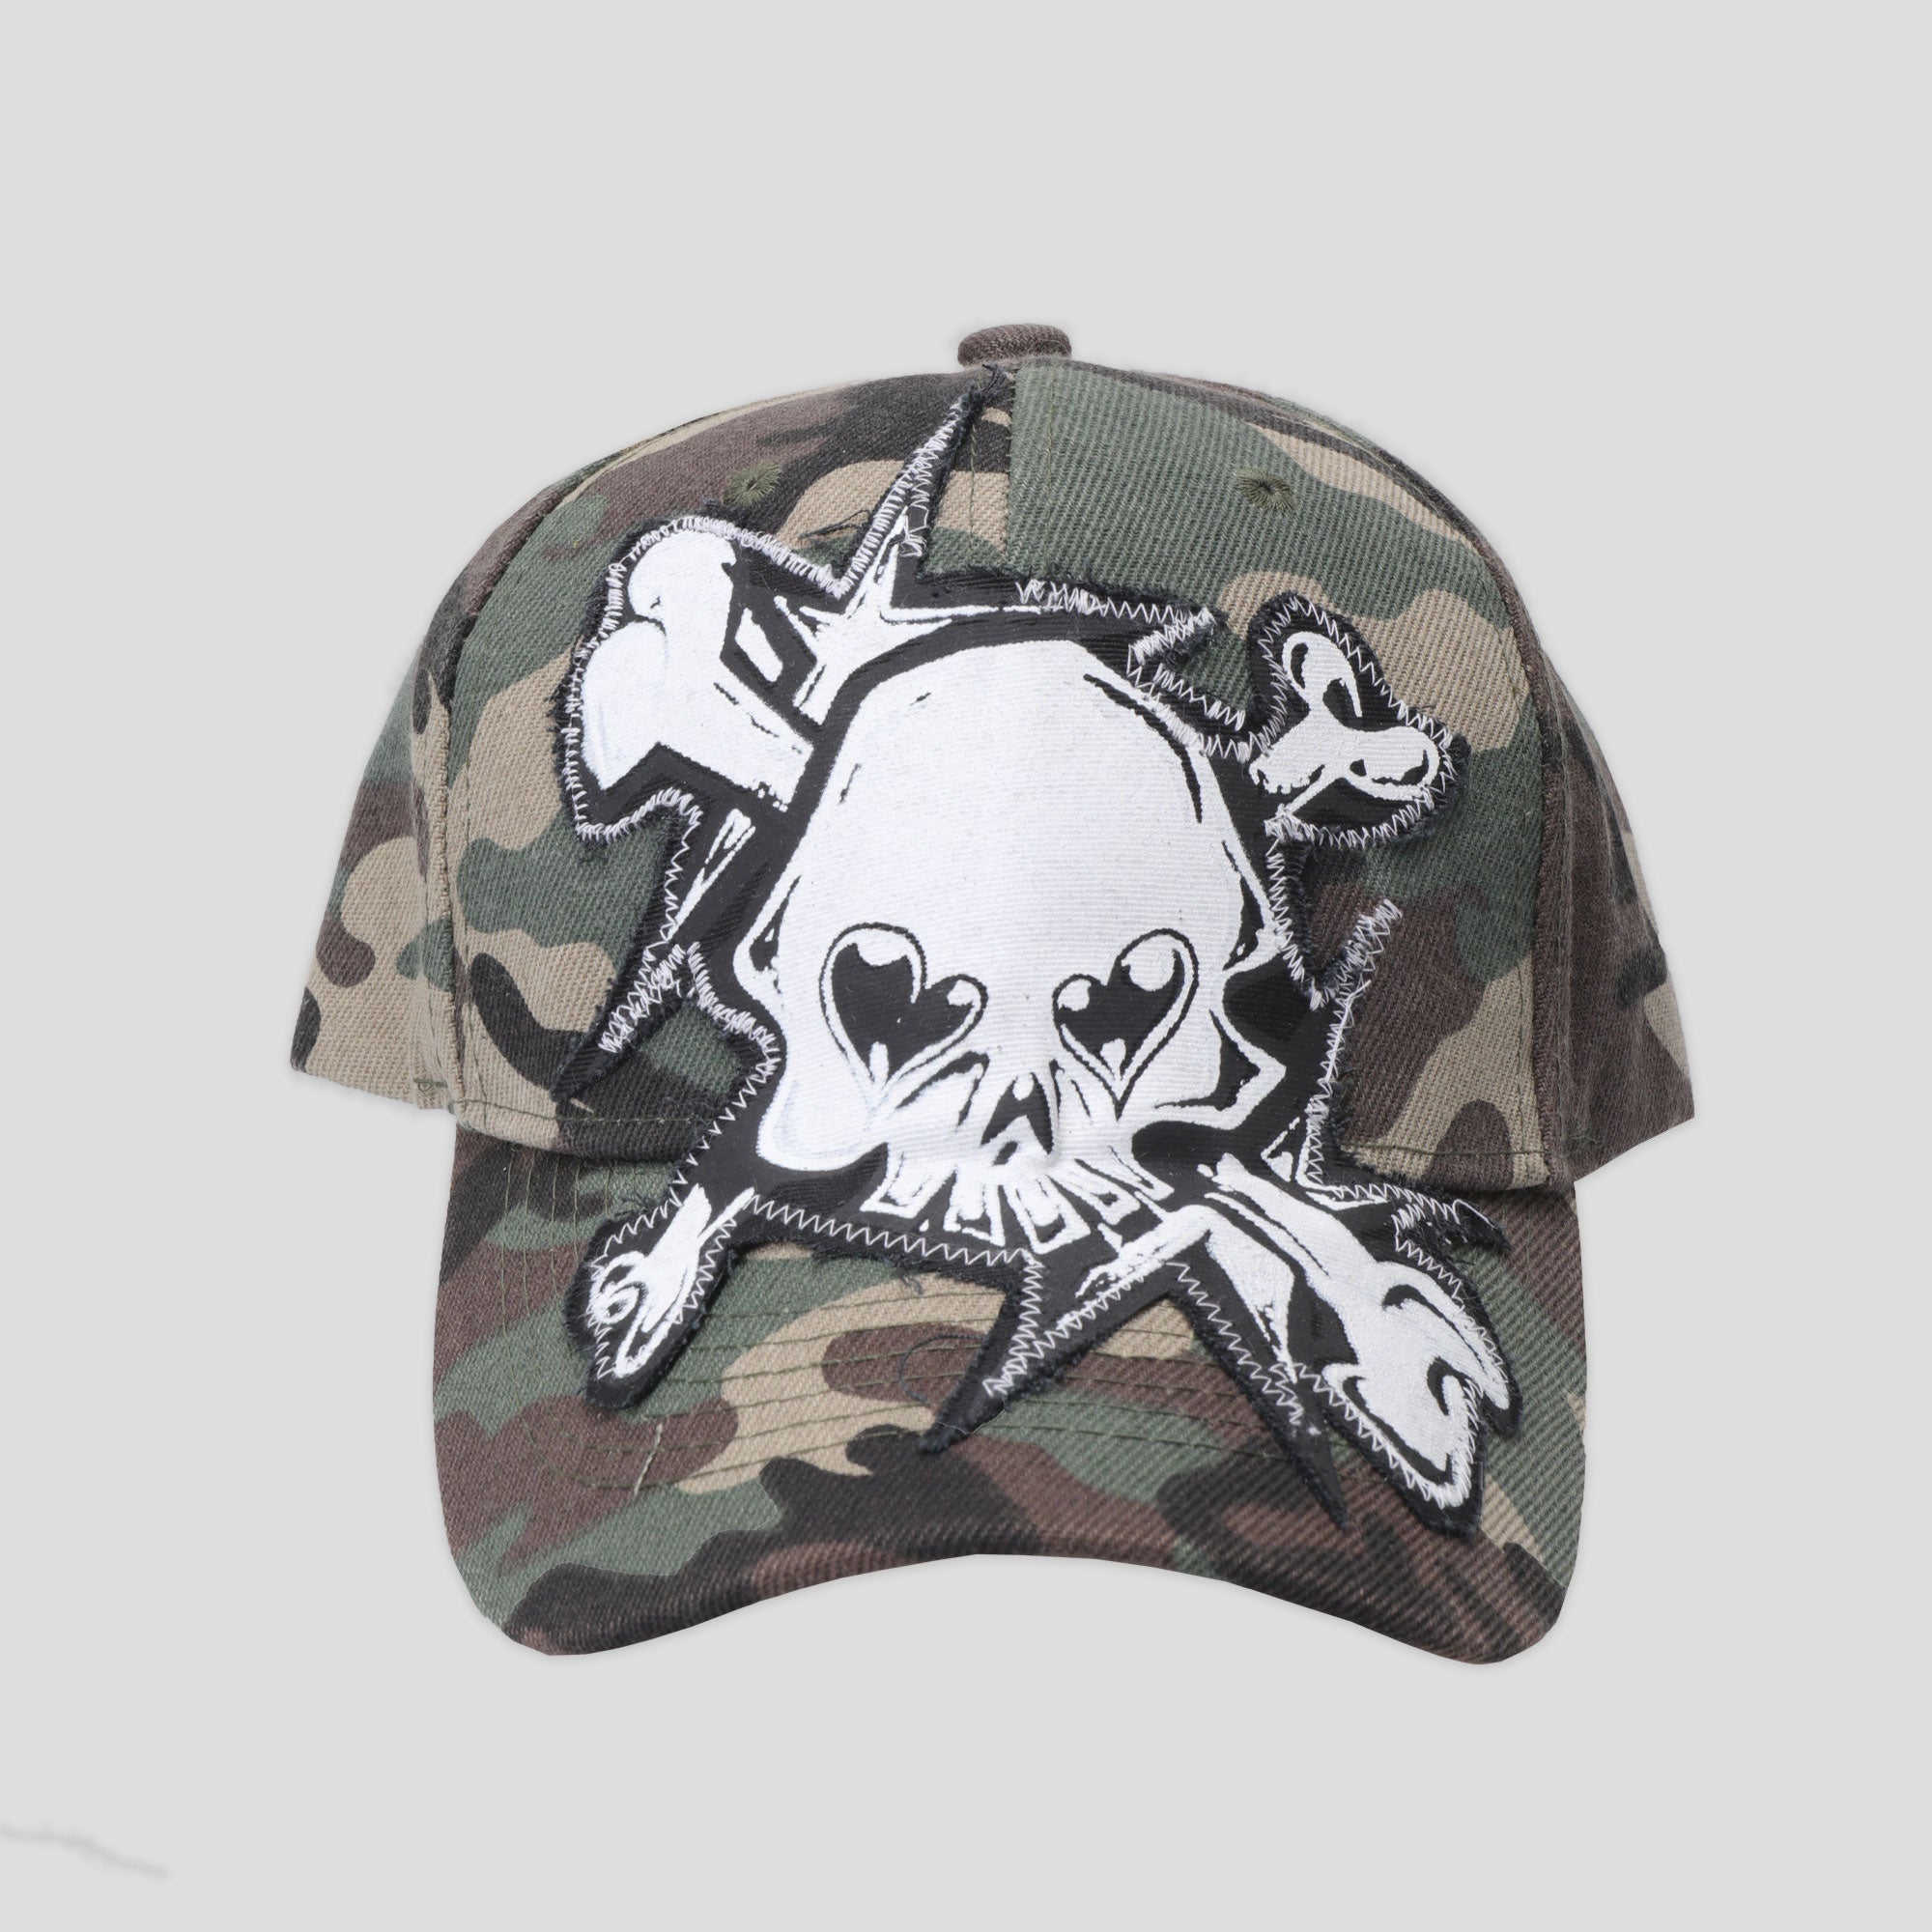 Personal Joint Skull Hat - Camo